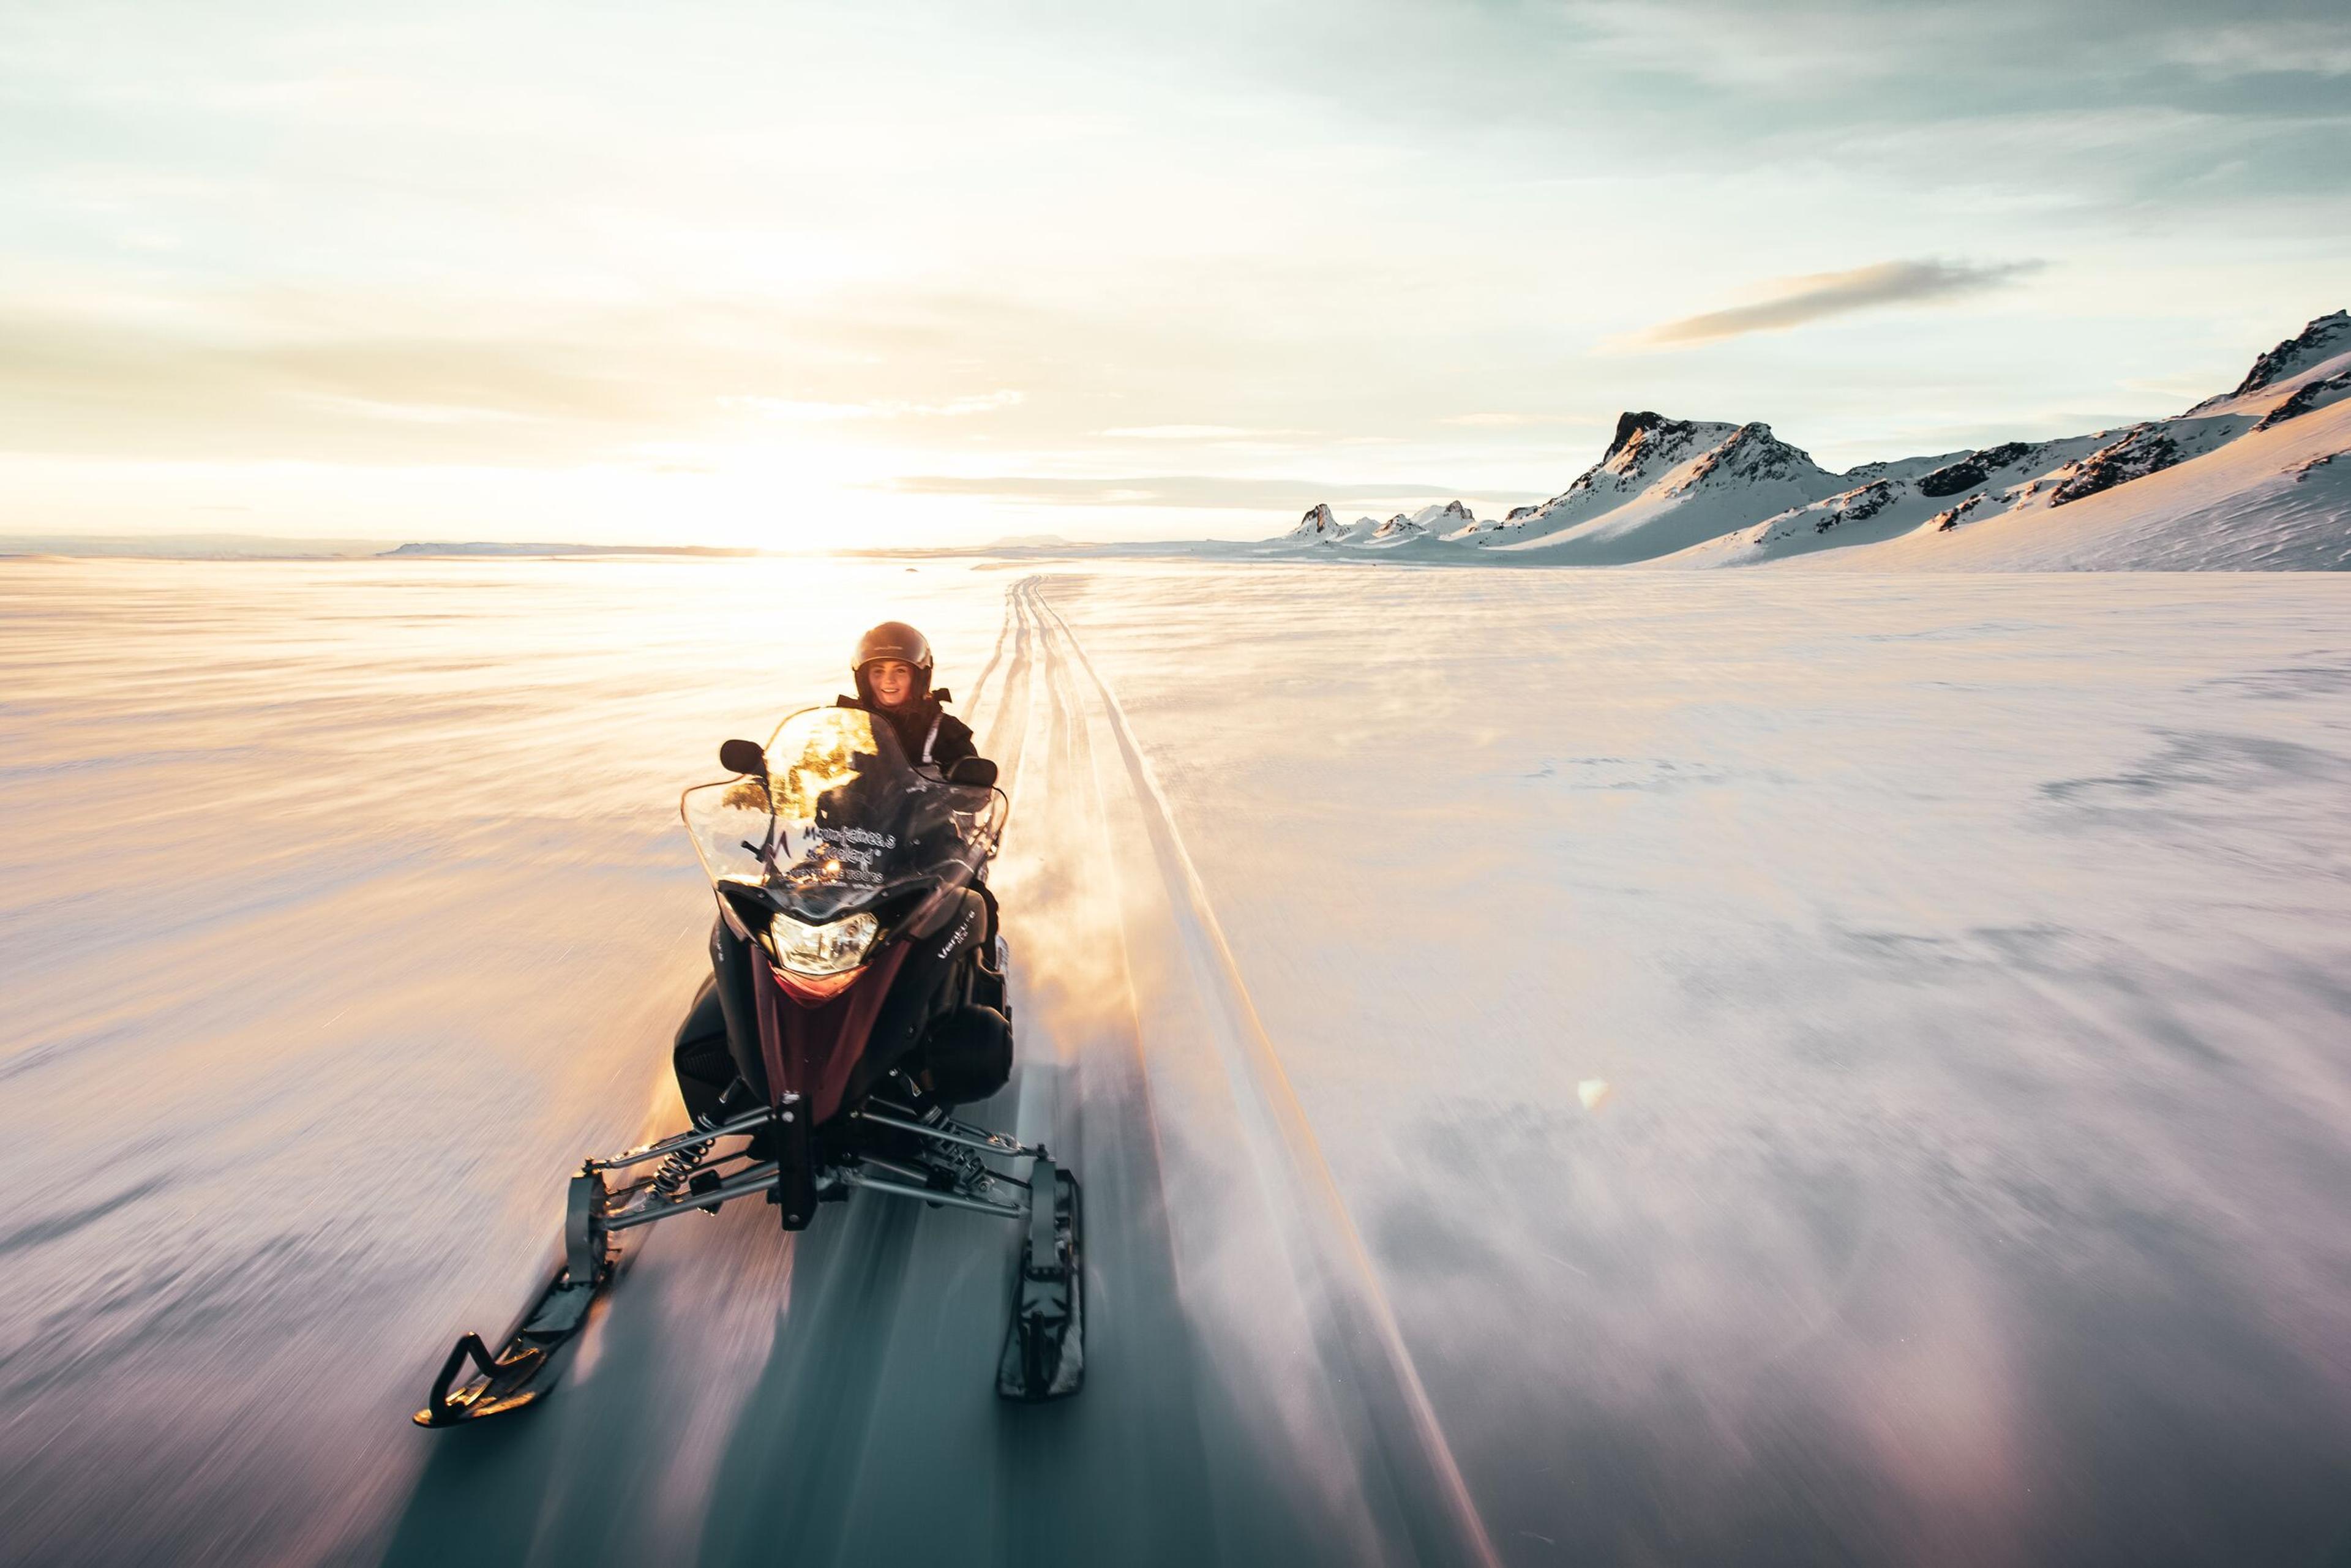 A person riding a snowmobile across a vast glacier, silhouetted against the radiant glow of a setting sun.